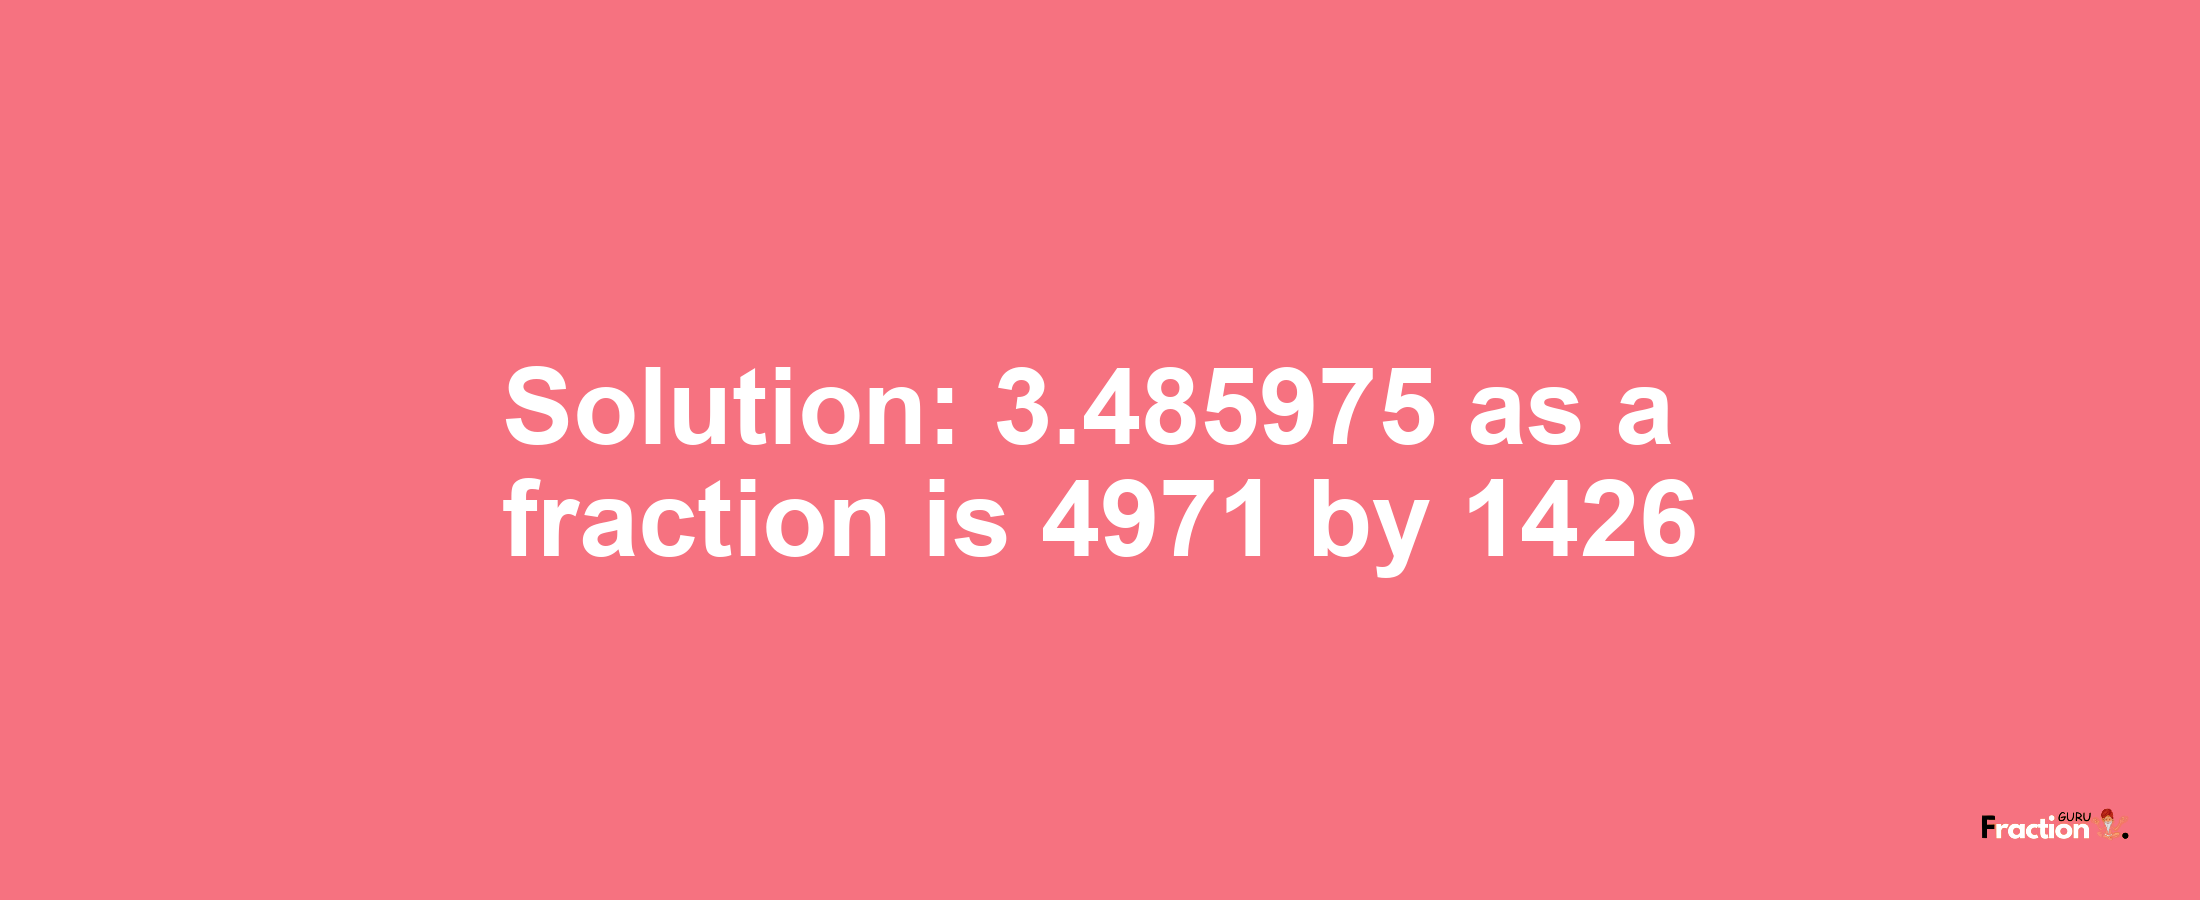 Solution:3.485975 as a fraction is 4971/1426